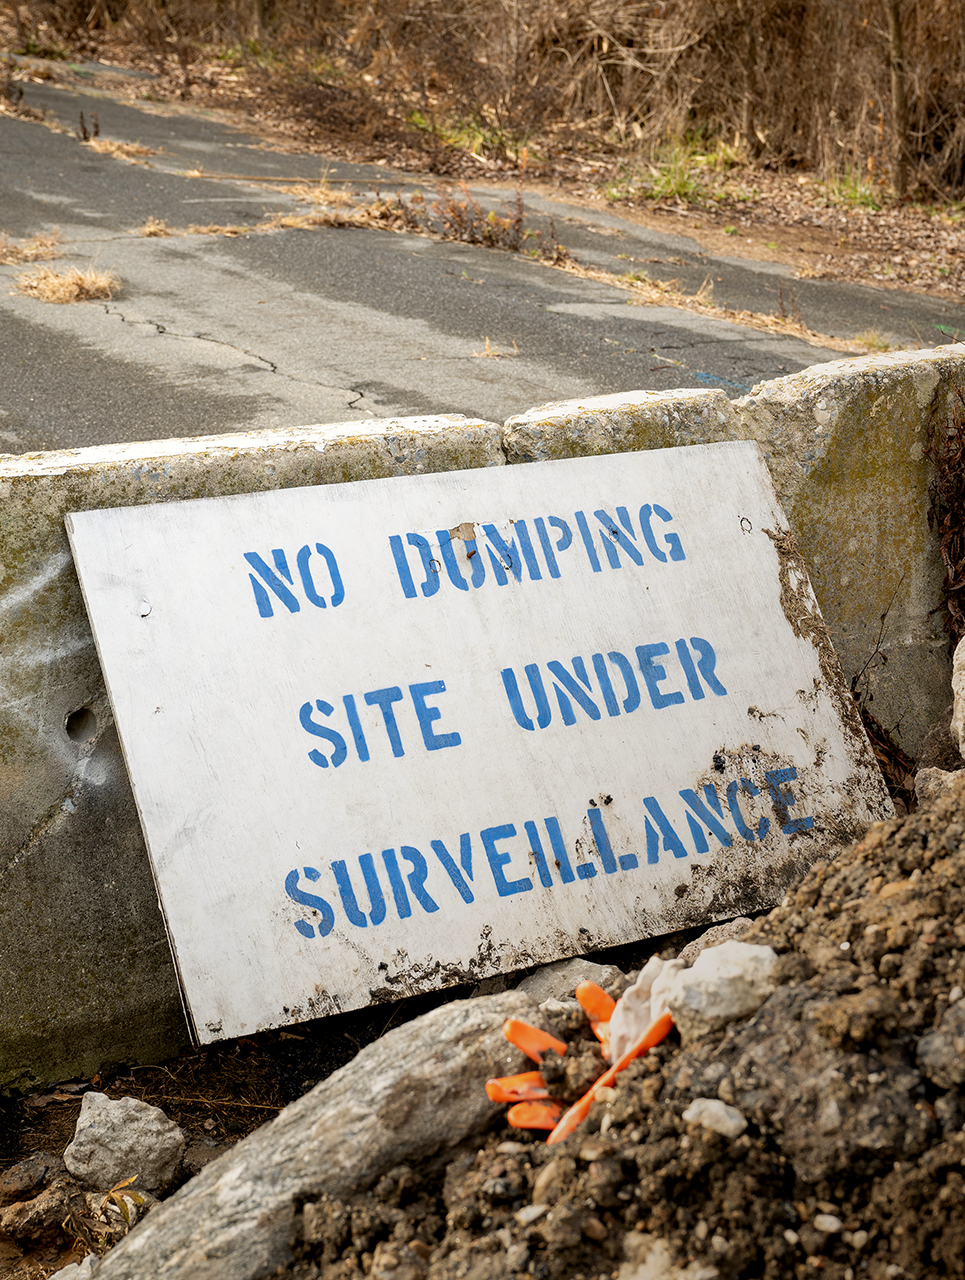 The city's illegal dumping problem persists despite decades of